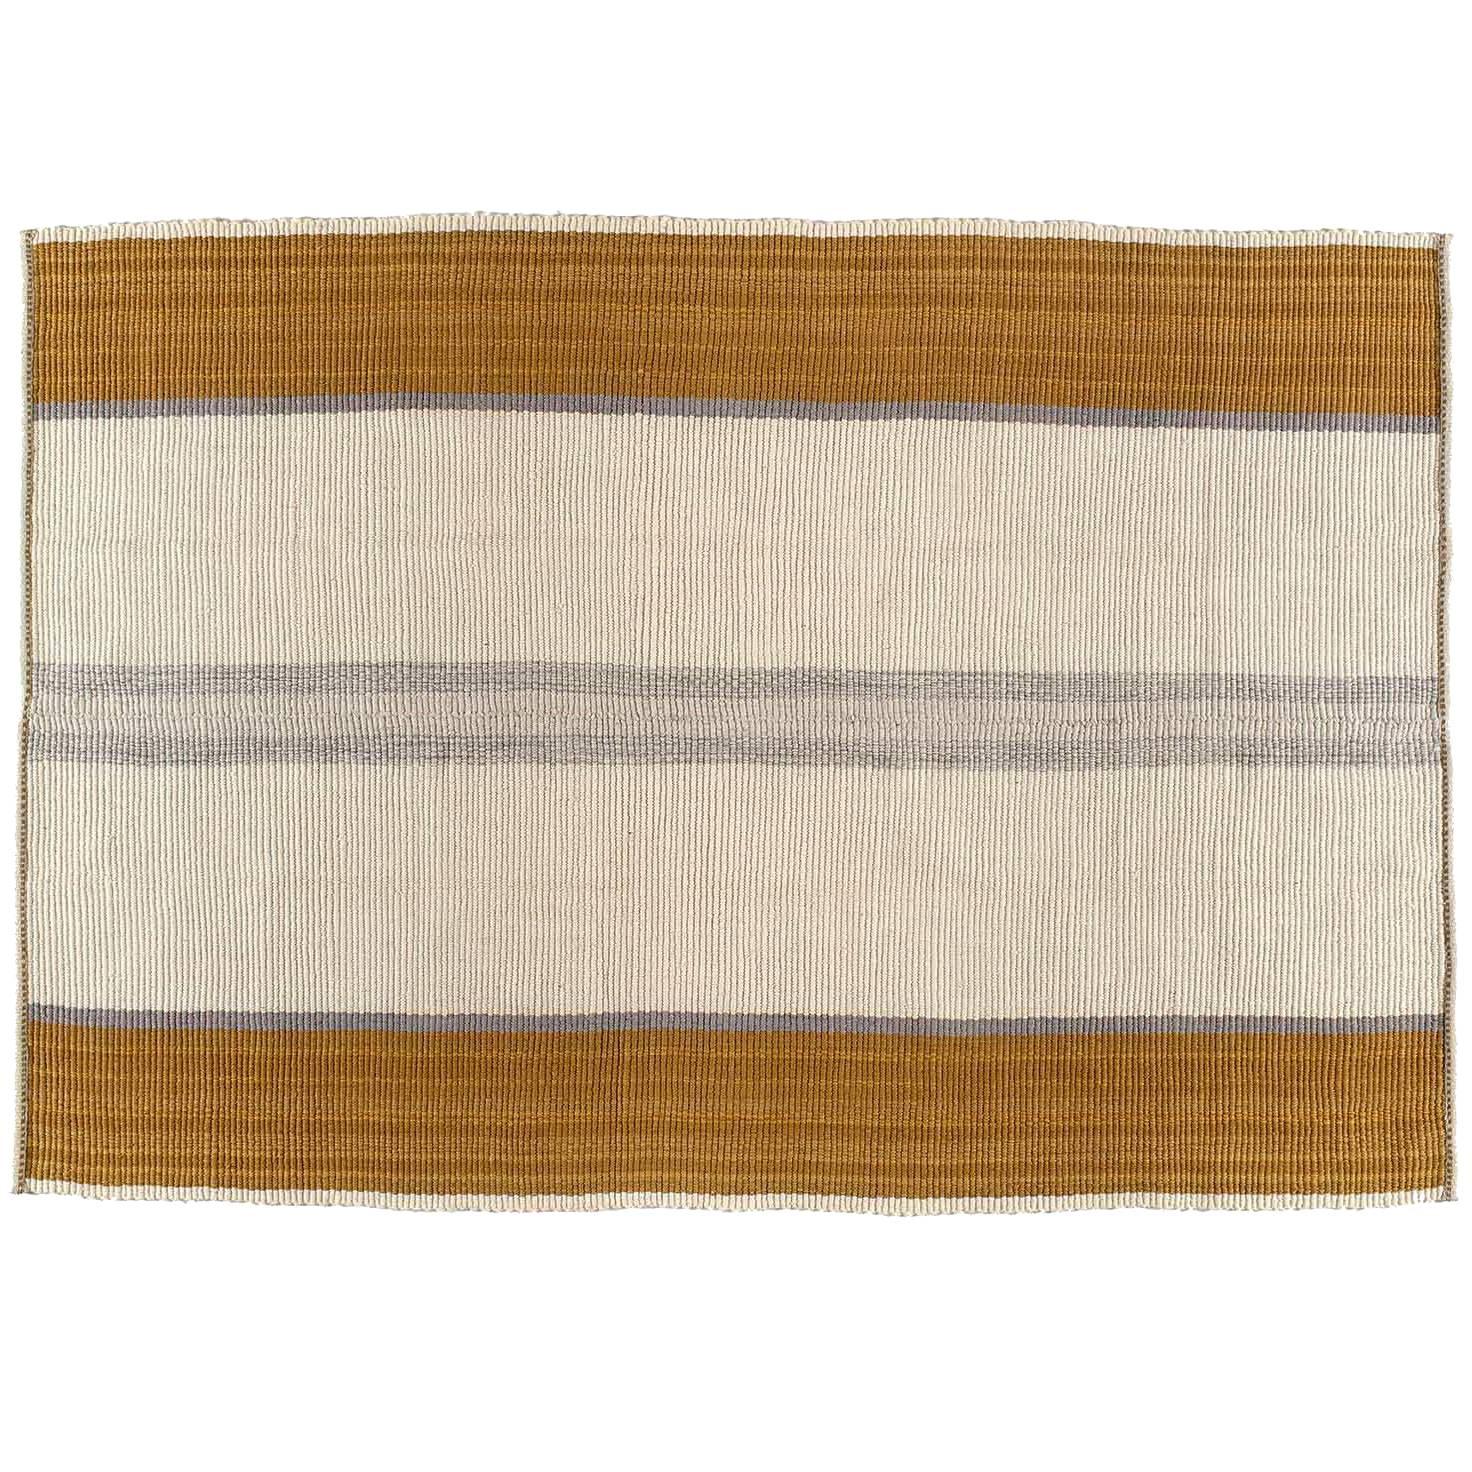 Pehuenche Rug Handwoven with Fine Hand Spun Sheepwool For Sale